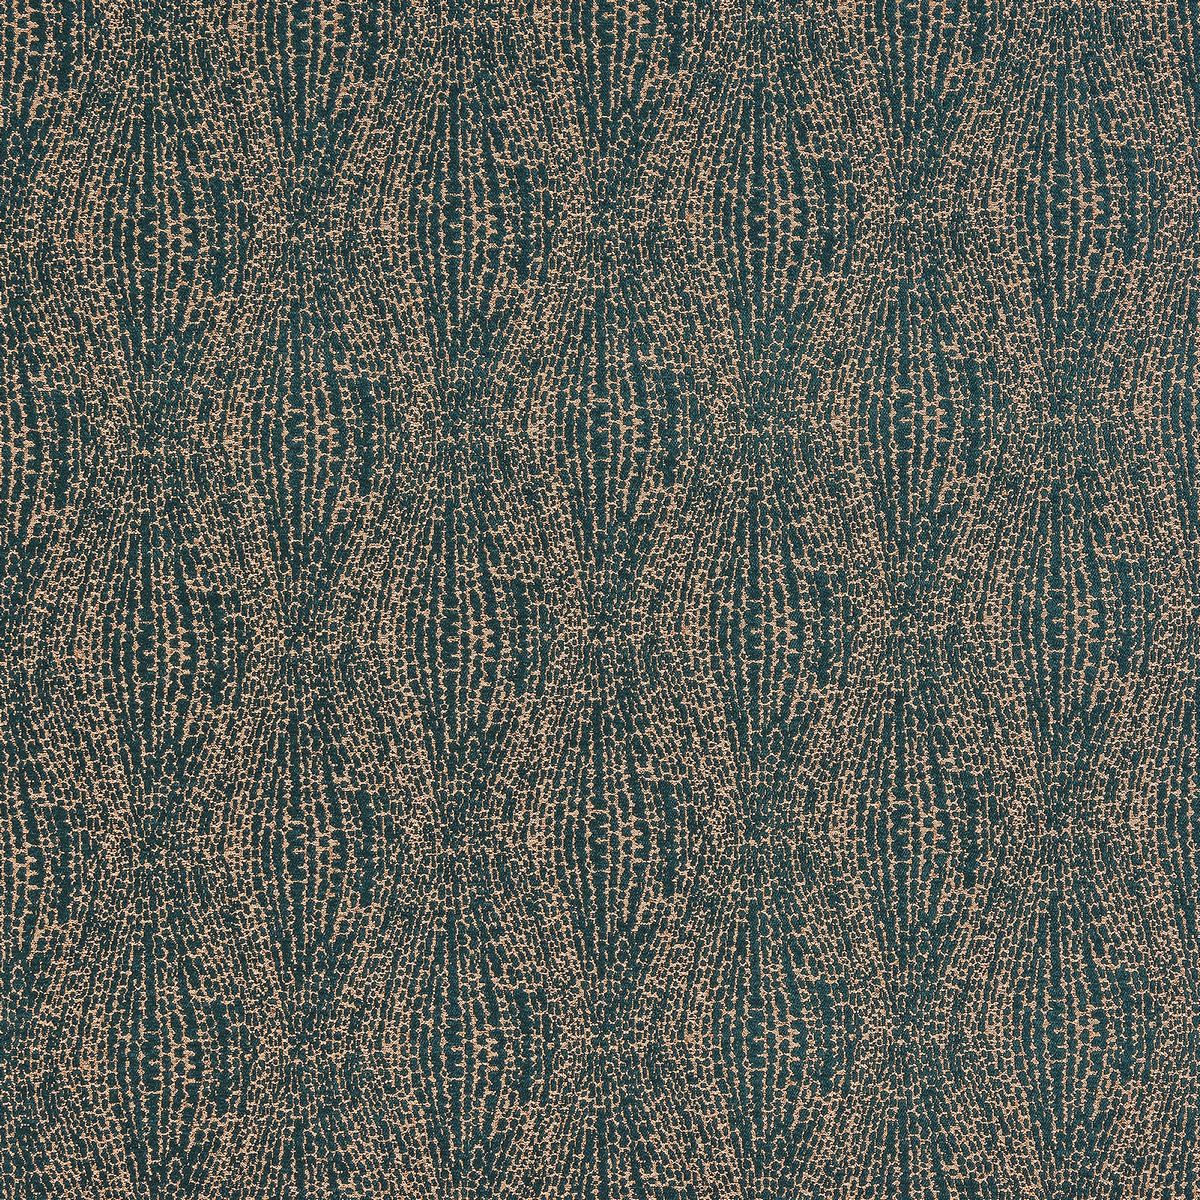 Babylon Teal Fabric by Porter & Stone